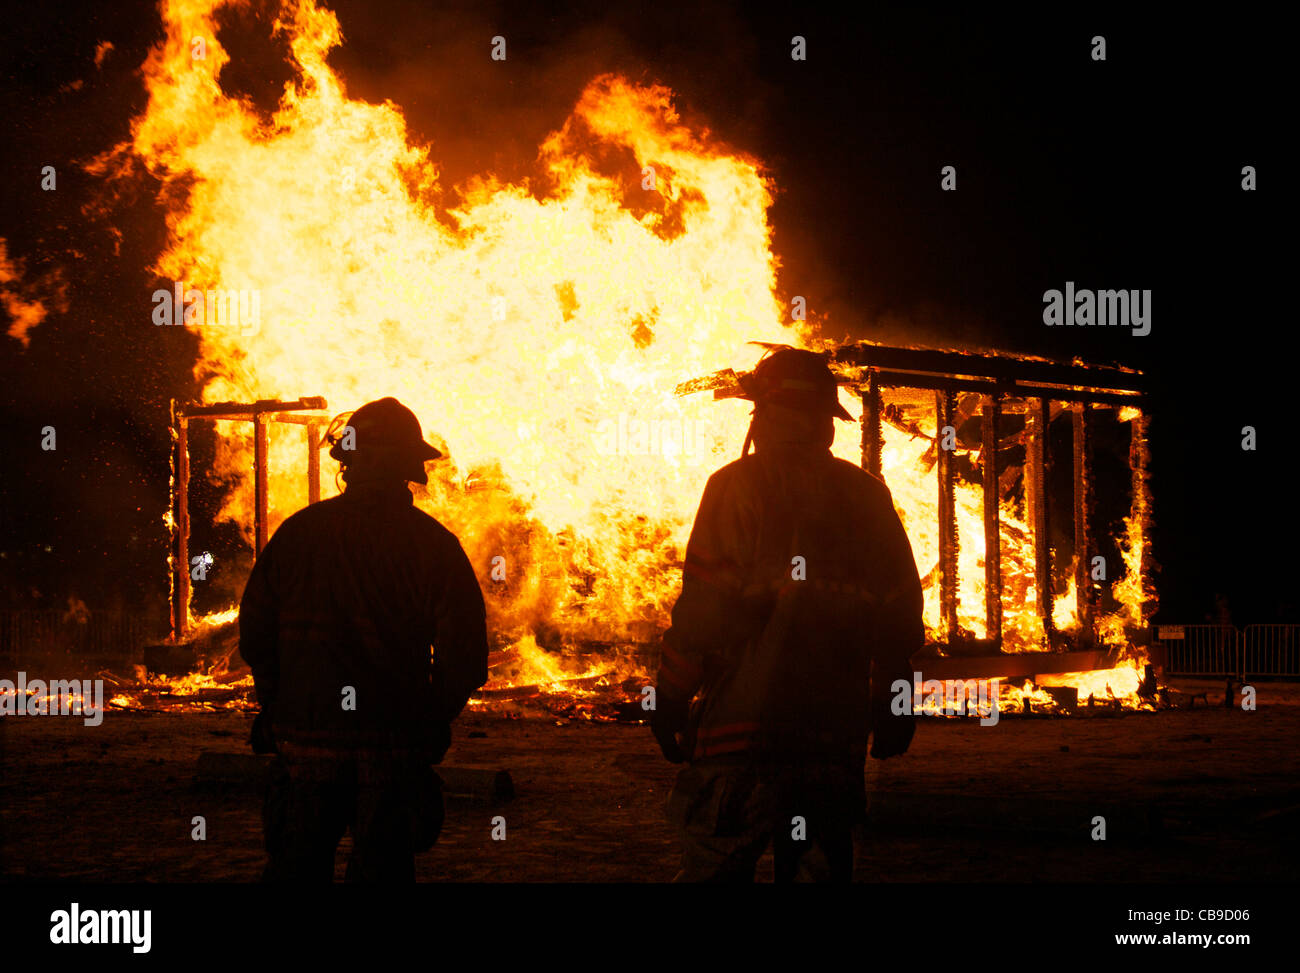 Two firemen watch a house burning out of control. Stock Photo